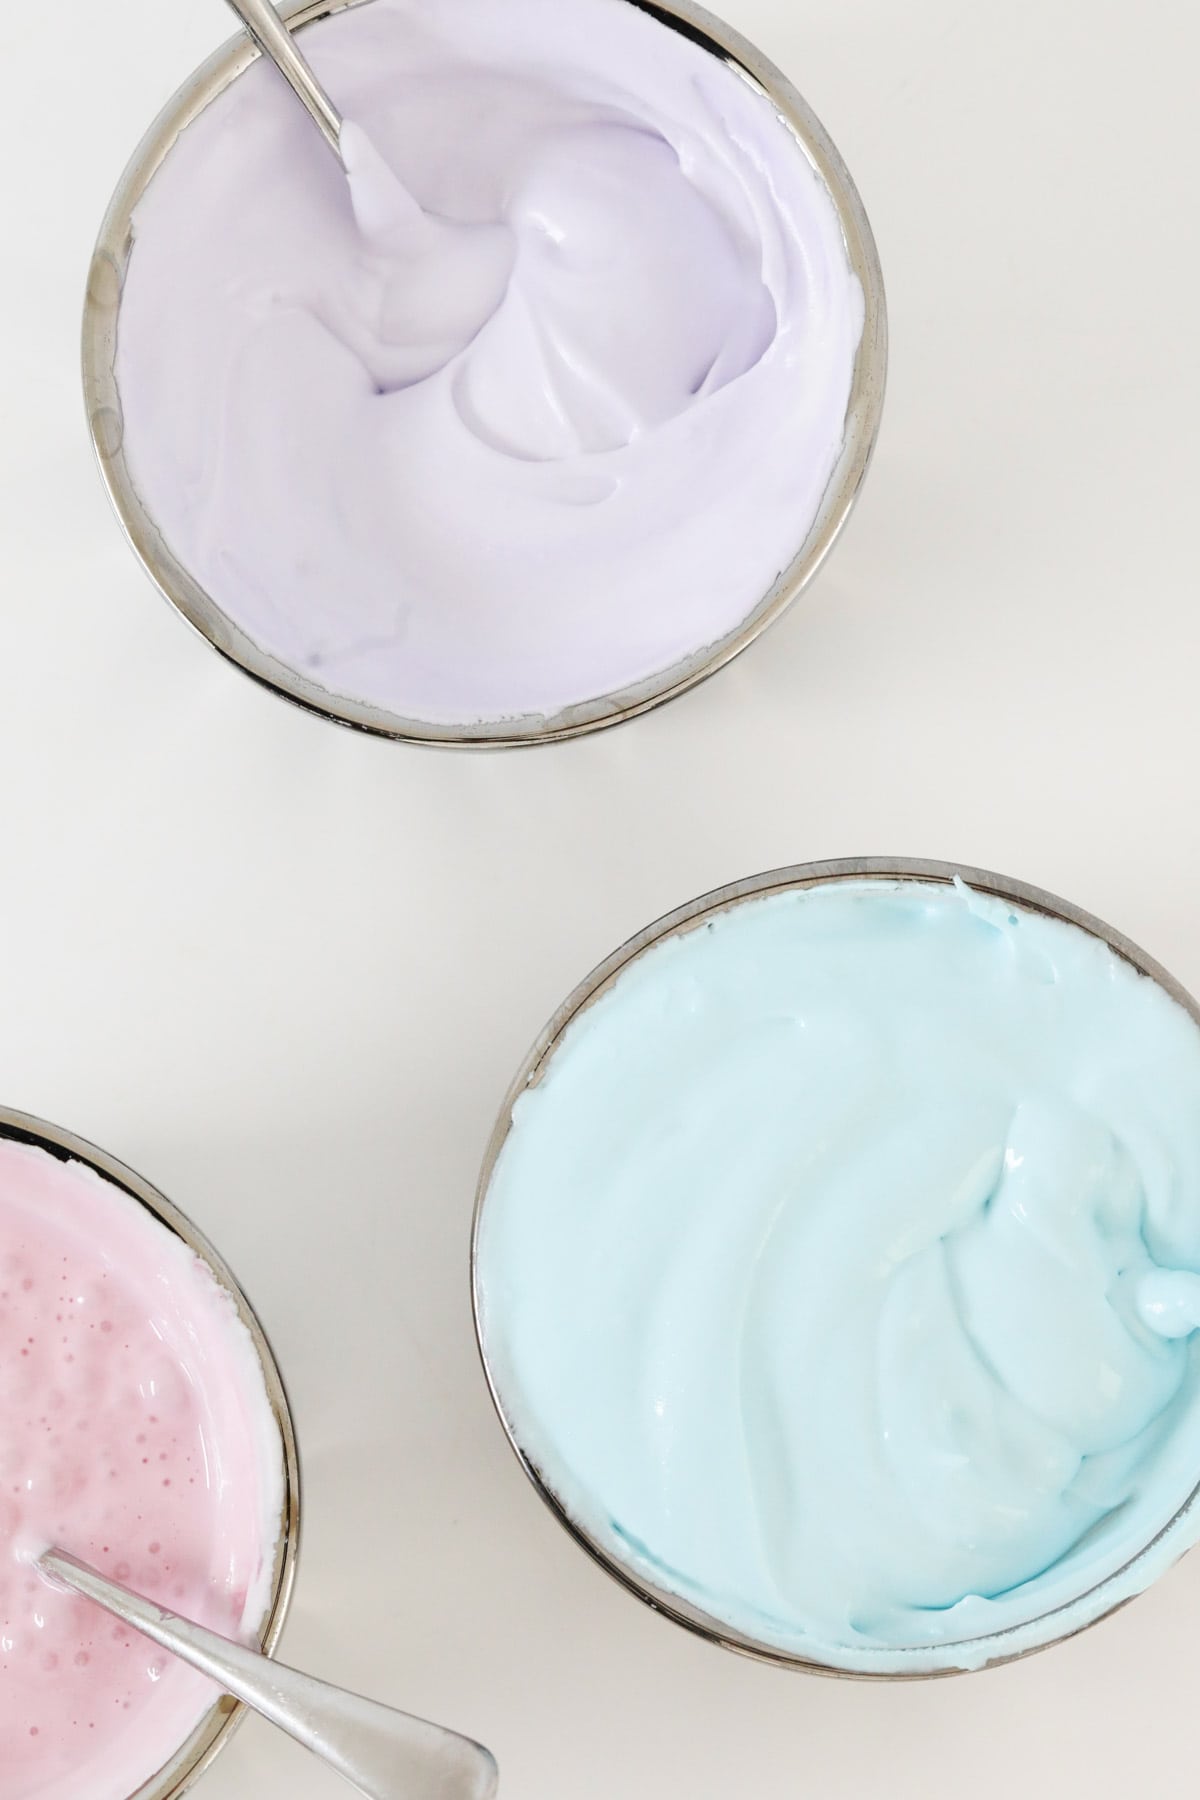 Three bowls of royal icing: one purple, one blue and one pink.